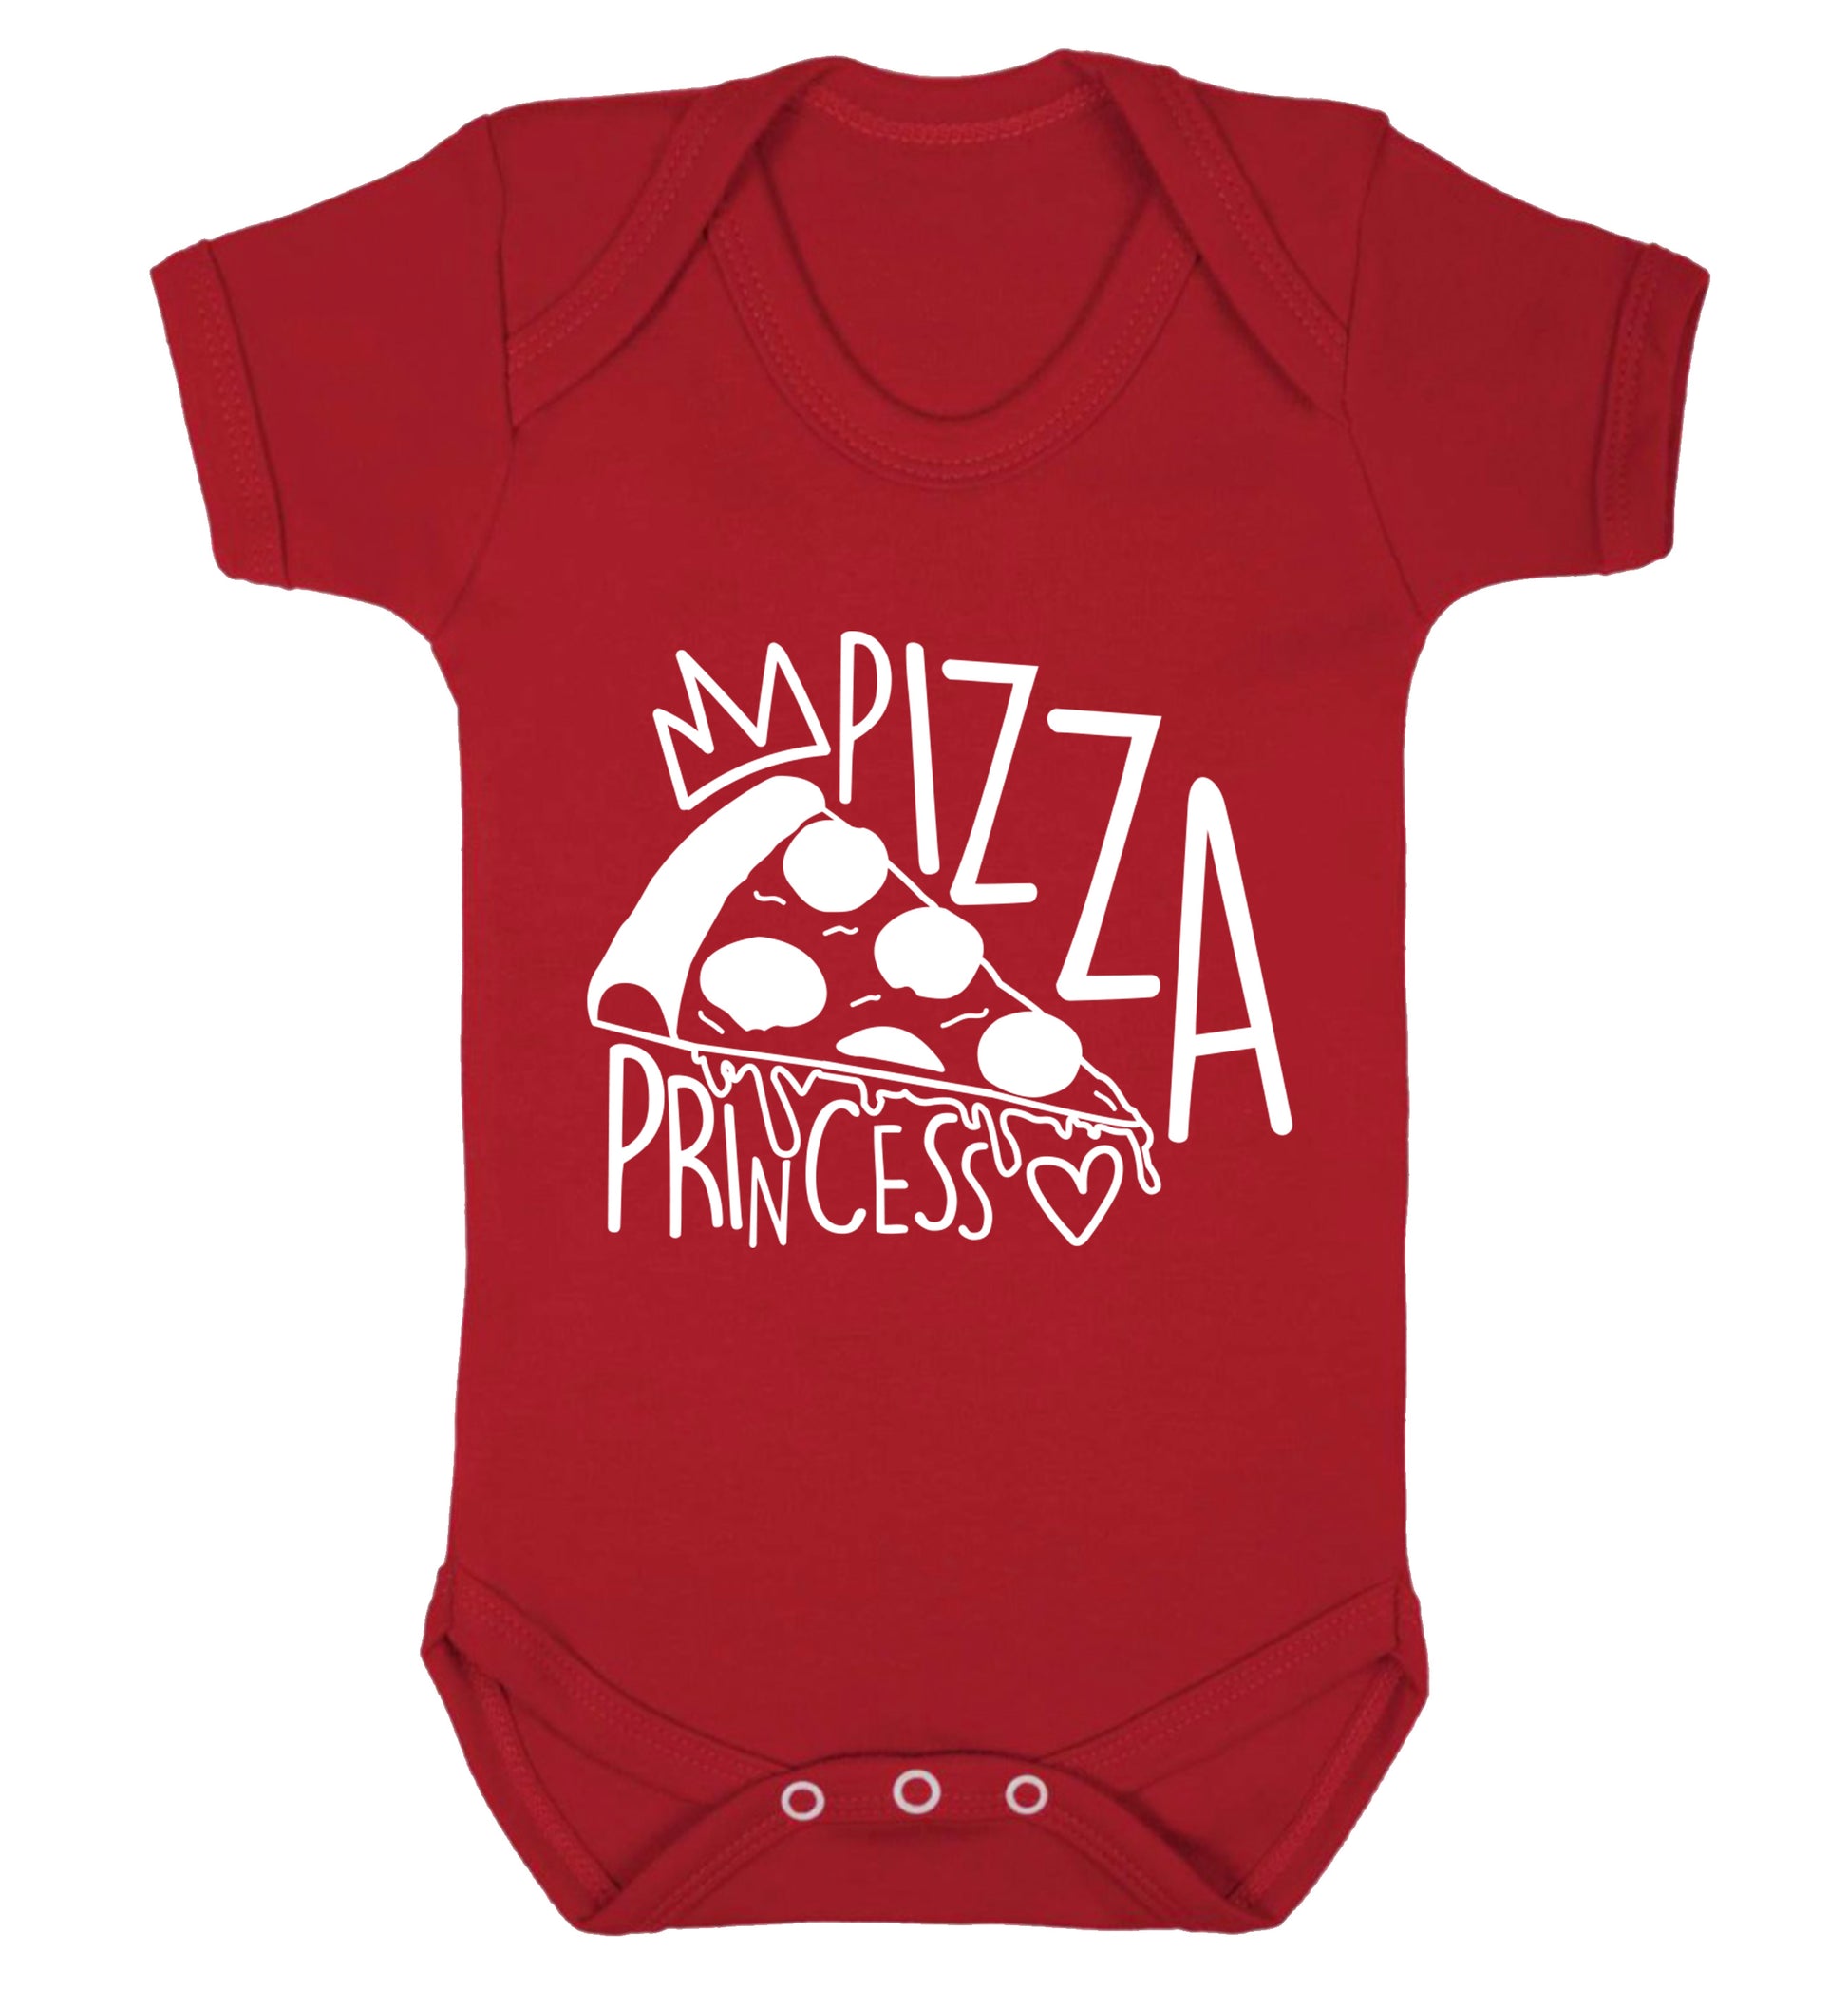 Pizza Princess Baby Vest red 18-24 months